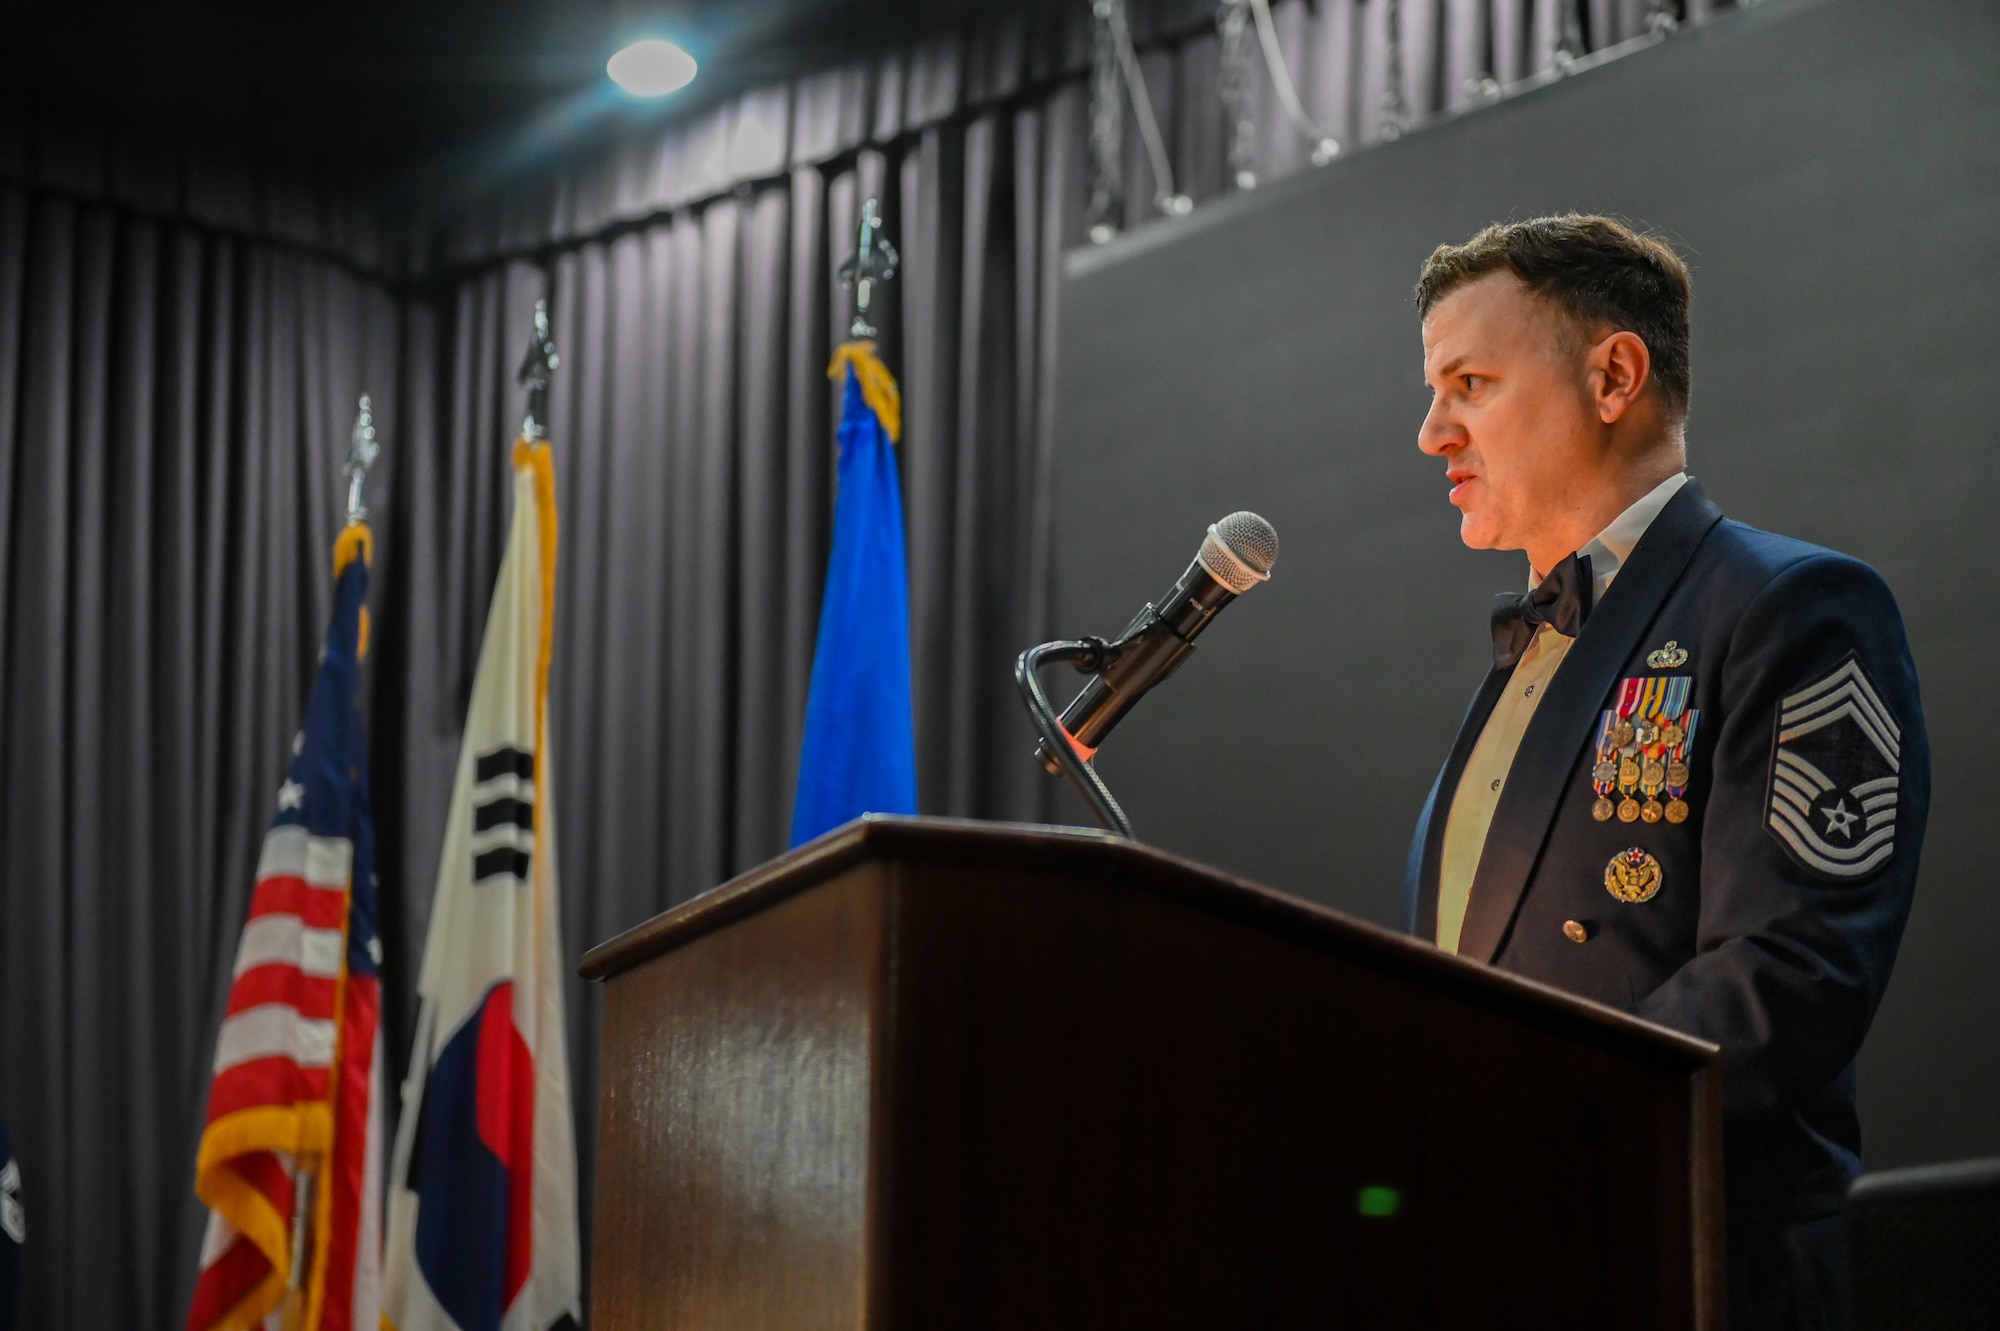 U.S Air Force Chief Master Sgt. David Weaver, 51st Comptroller Squadron senior enlisted leader, speaks during a Chief Recognition Ceremony at Osan Air Base, Republic of Korea, March 17, 2023.